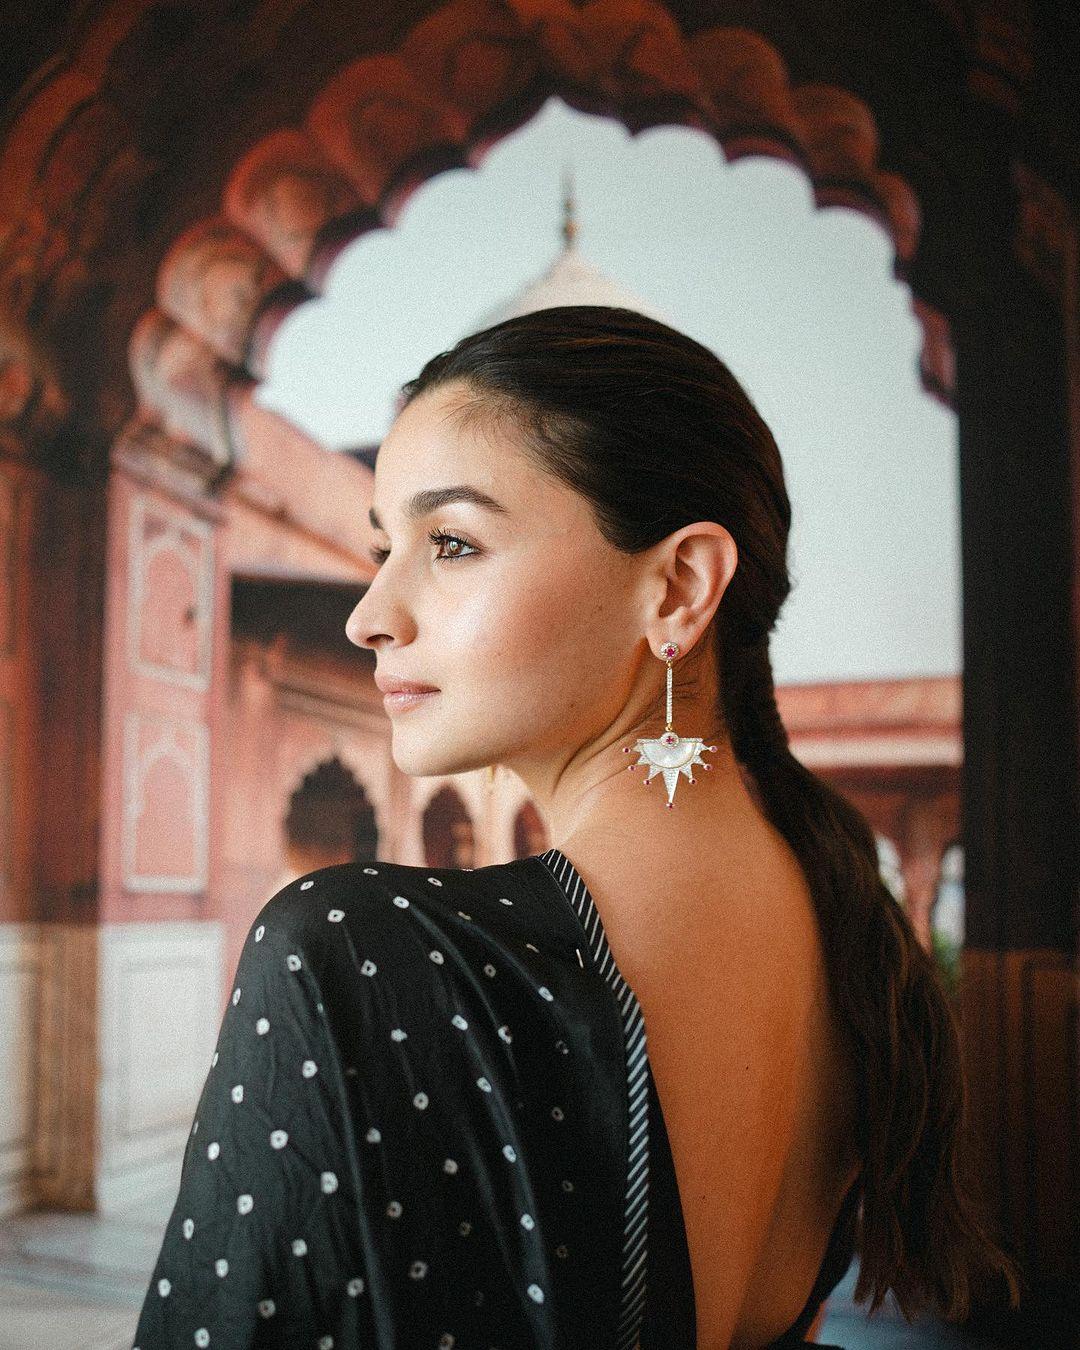 Alia Bhatt effortlessly donned a black polka dot saree that oozed charm. The playful yet sophisticated pattern brought a delightful twist to the traditional attire.